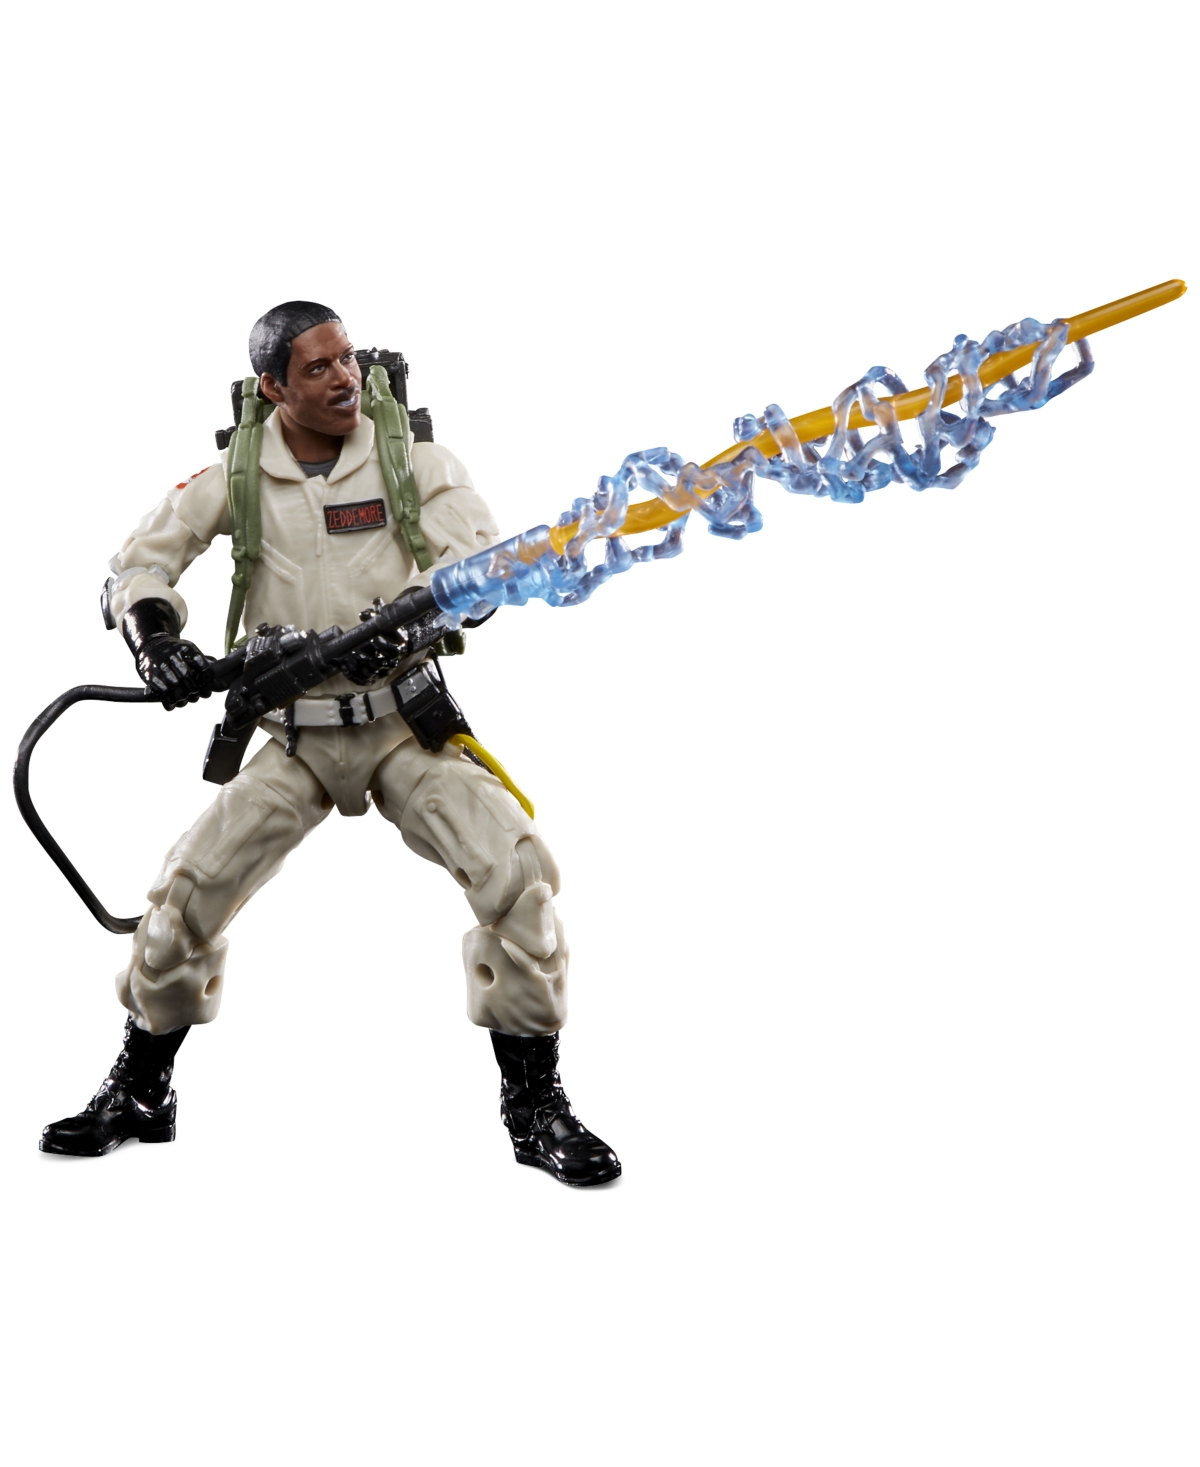 EAN 5010993689071 product image for Ghostbusters Plasma Series Zeddemore Action Figure | upcitemdb.com